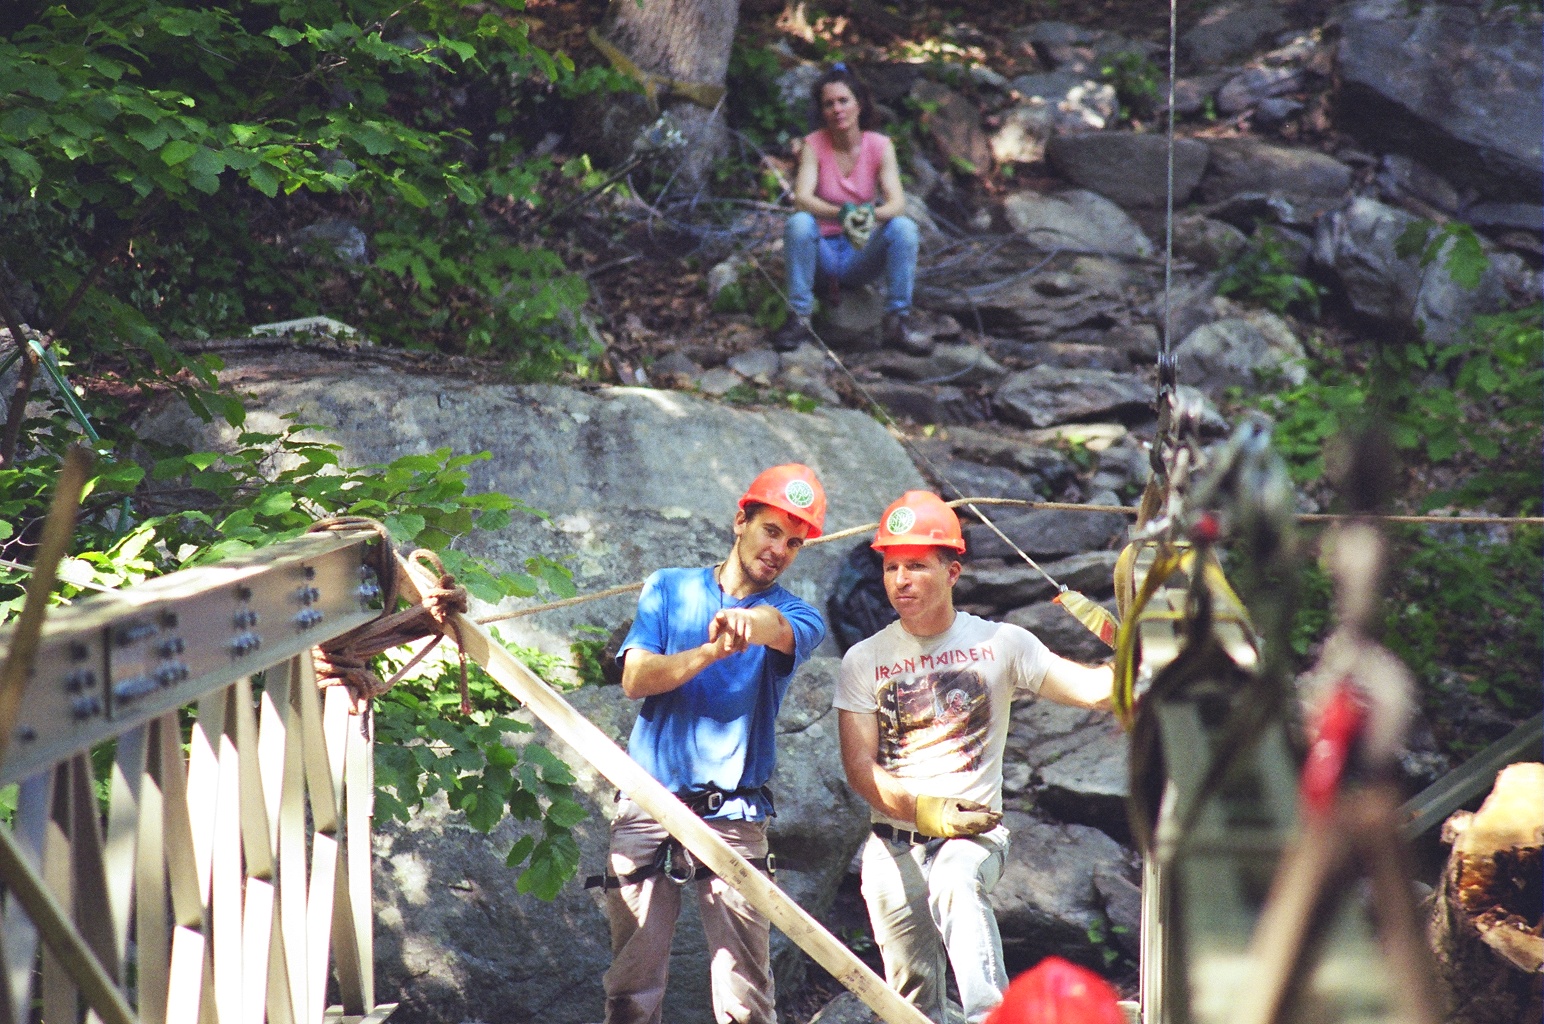 Trail builders using a rigging system to install a bridge